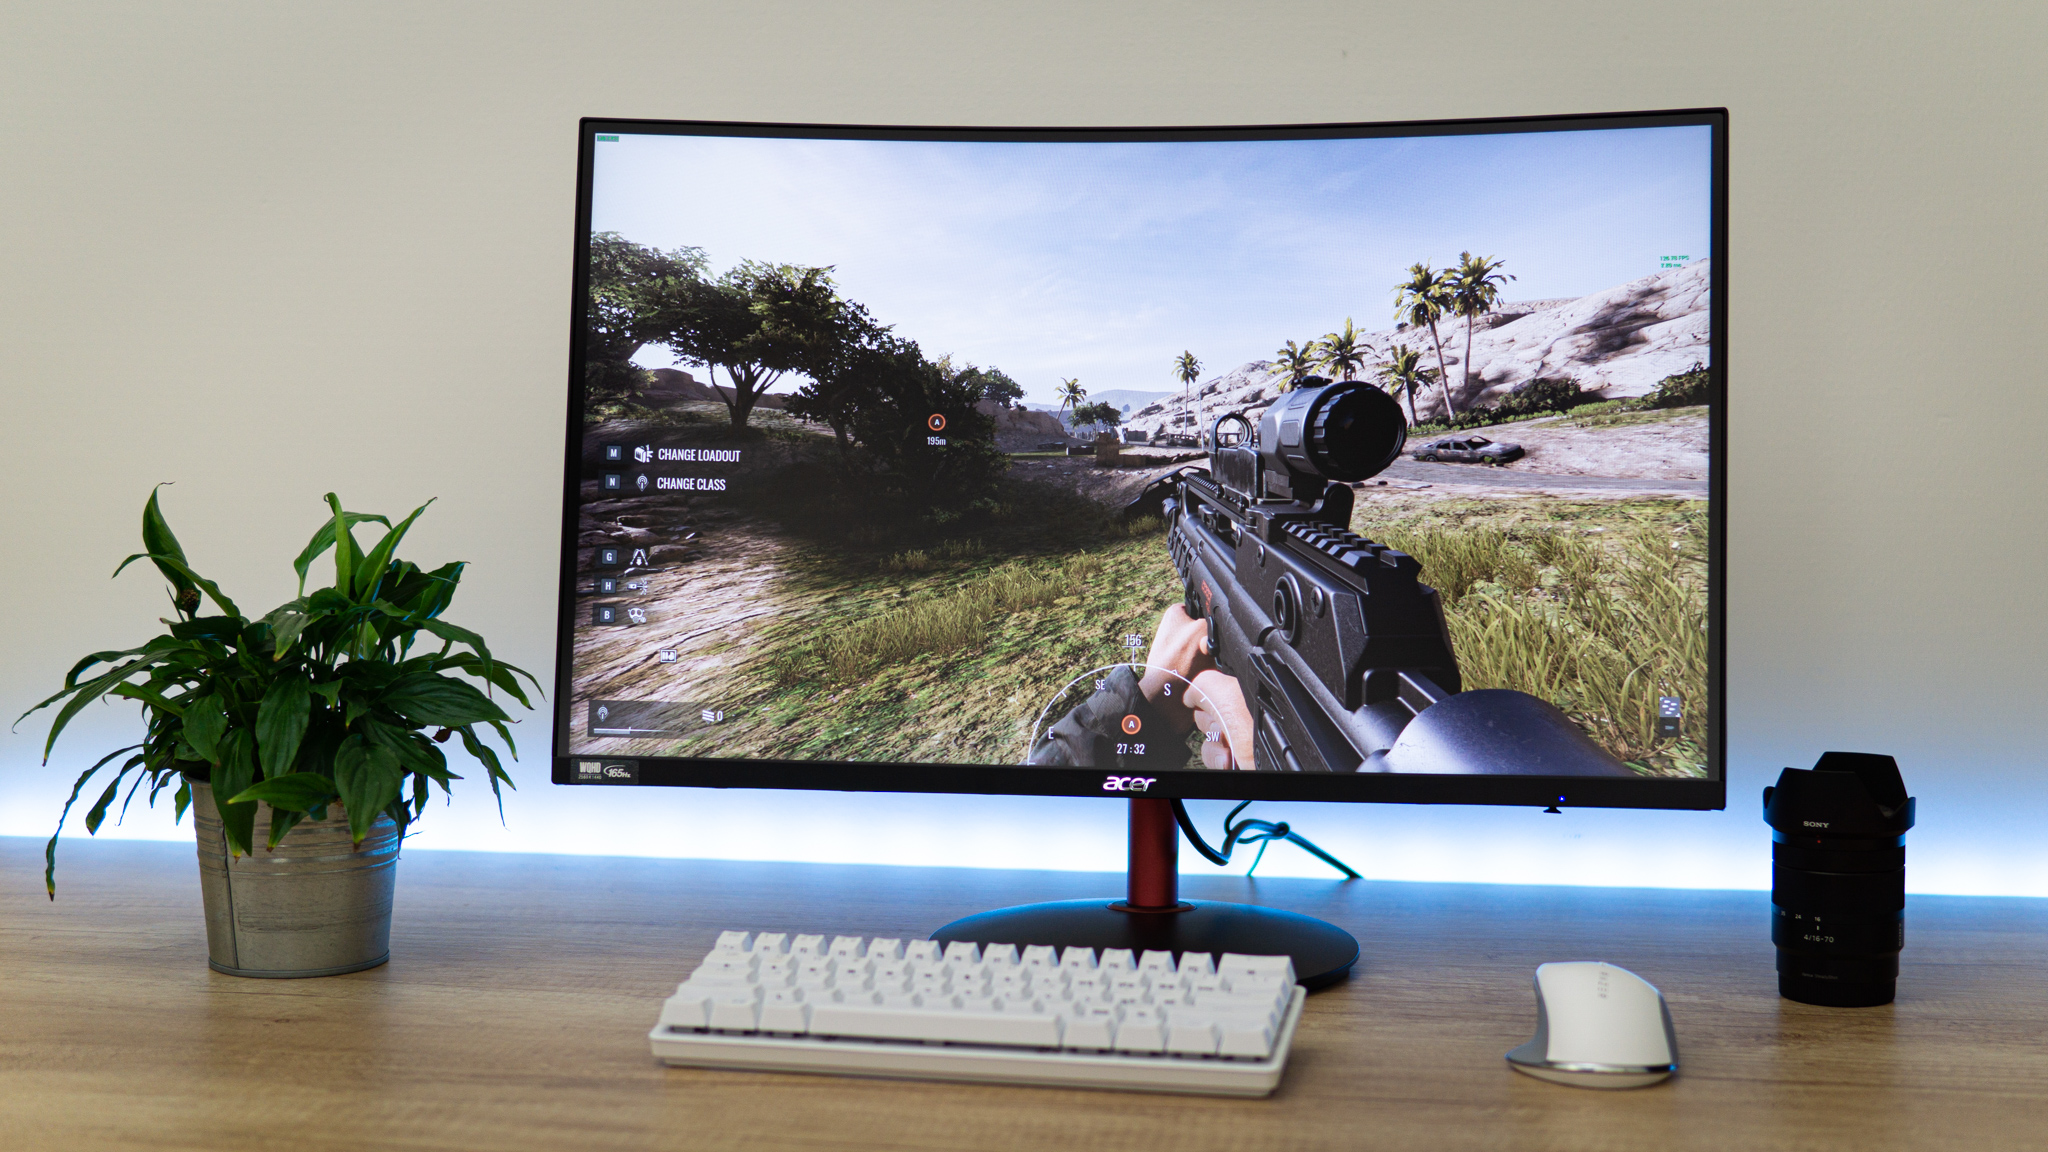 Trying 165 Hz For the First Time! - My Experience 